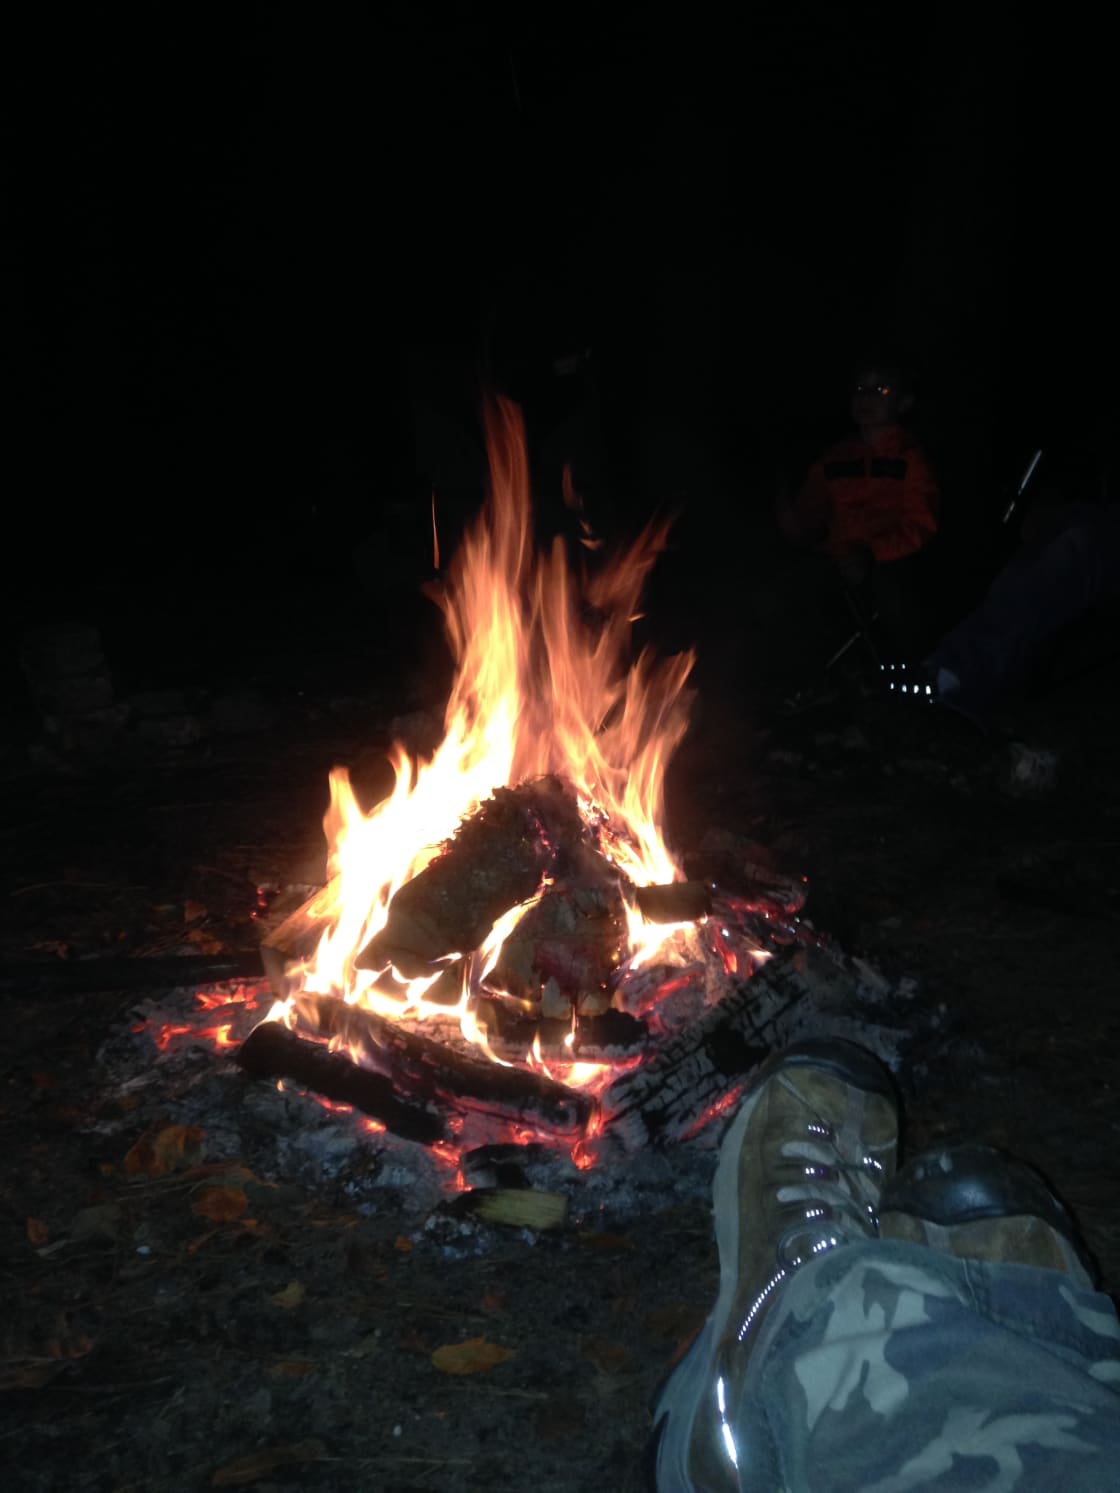 not much better than a campfire, by the lake, in the middle of a forest. pass the jar. ;-)